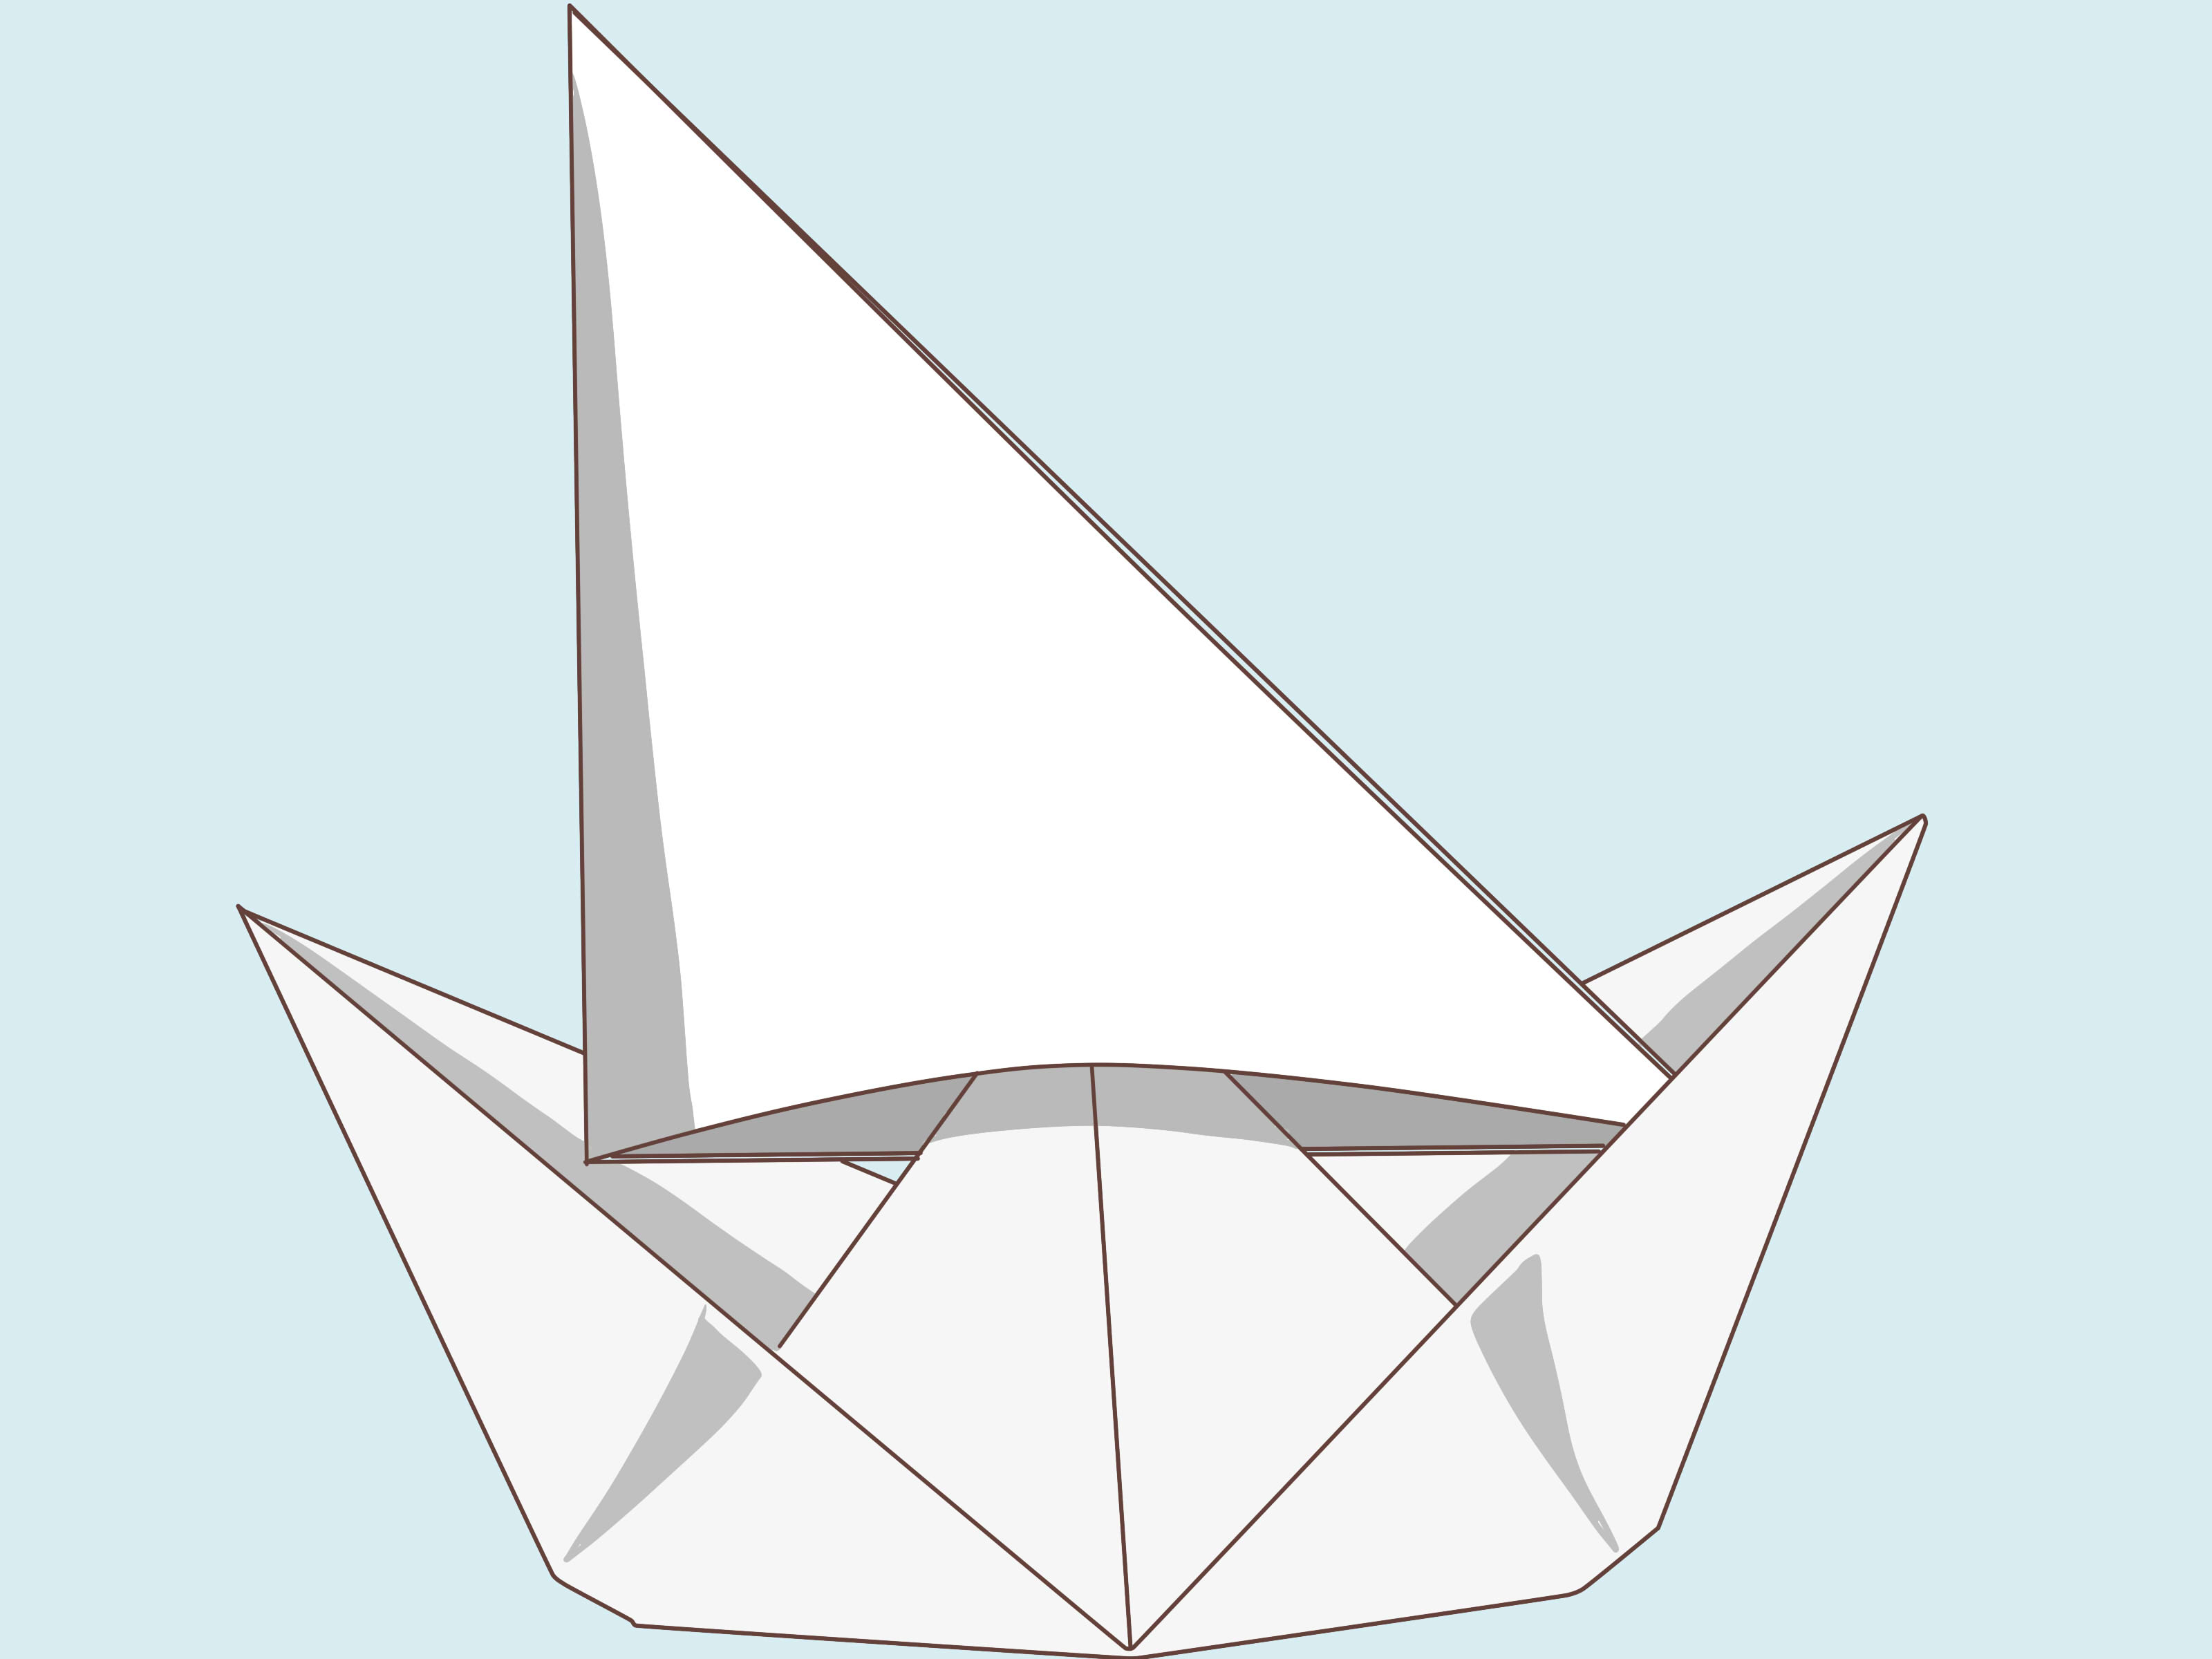 How To Make An Origami Boat Easy How To Make A Paper Boat With A Big Sail 12 Steps With Pictures